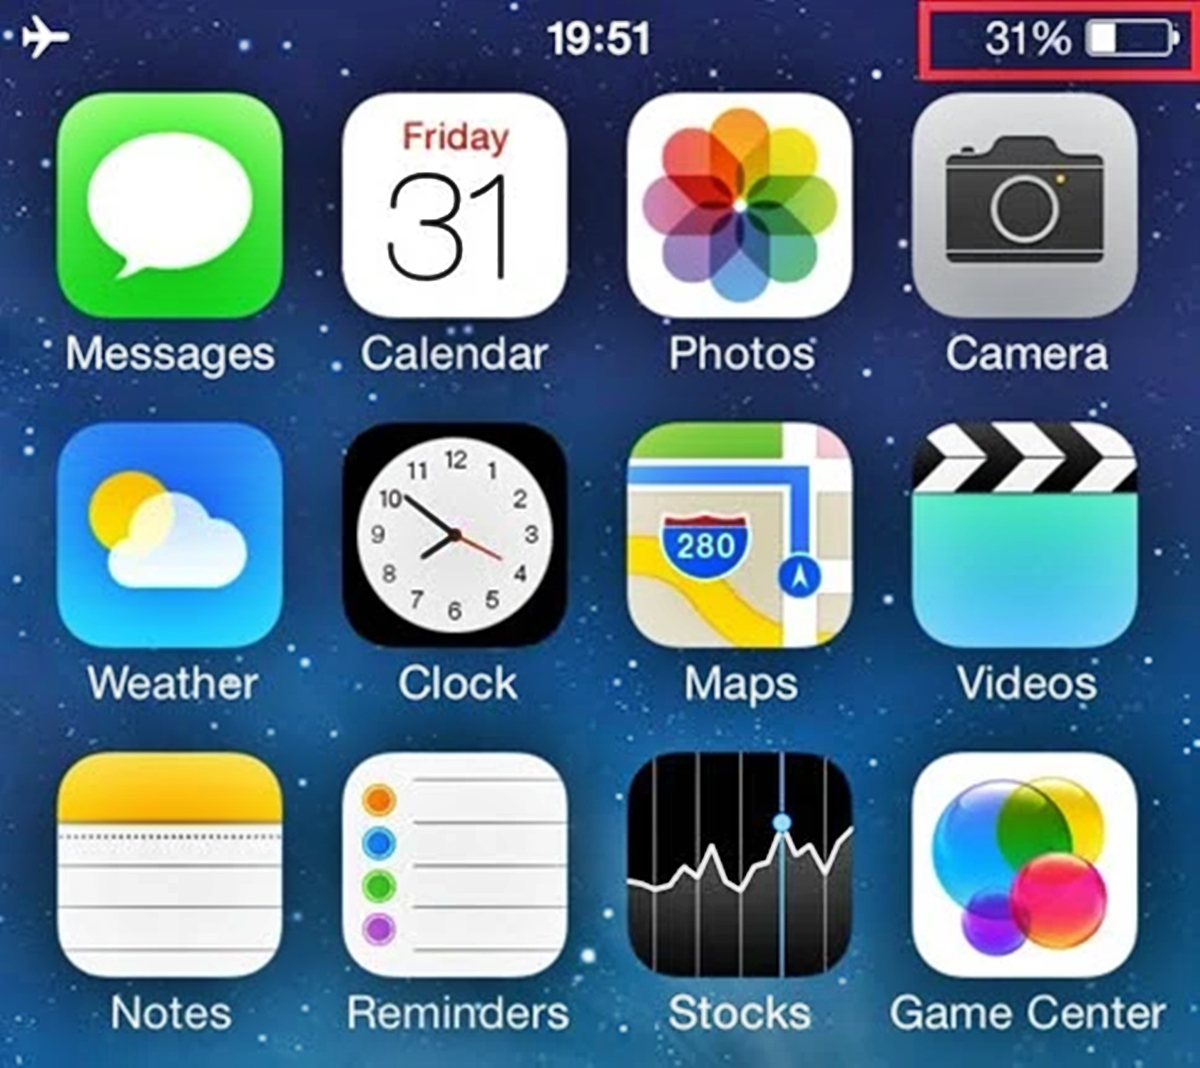 why-is-install-now-grayed-out-on-my-iphone-or-other-apple-device